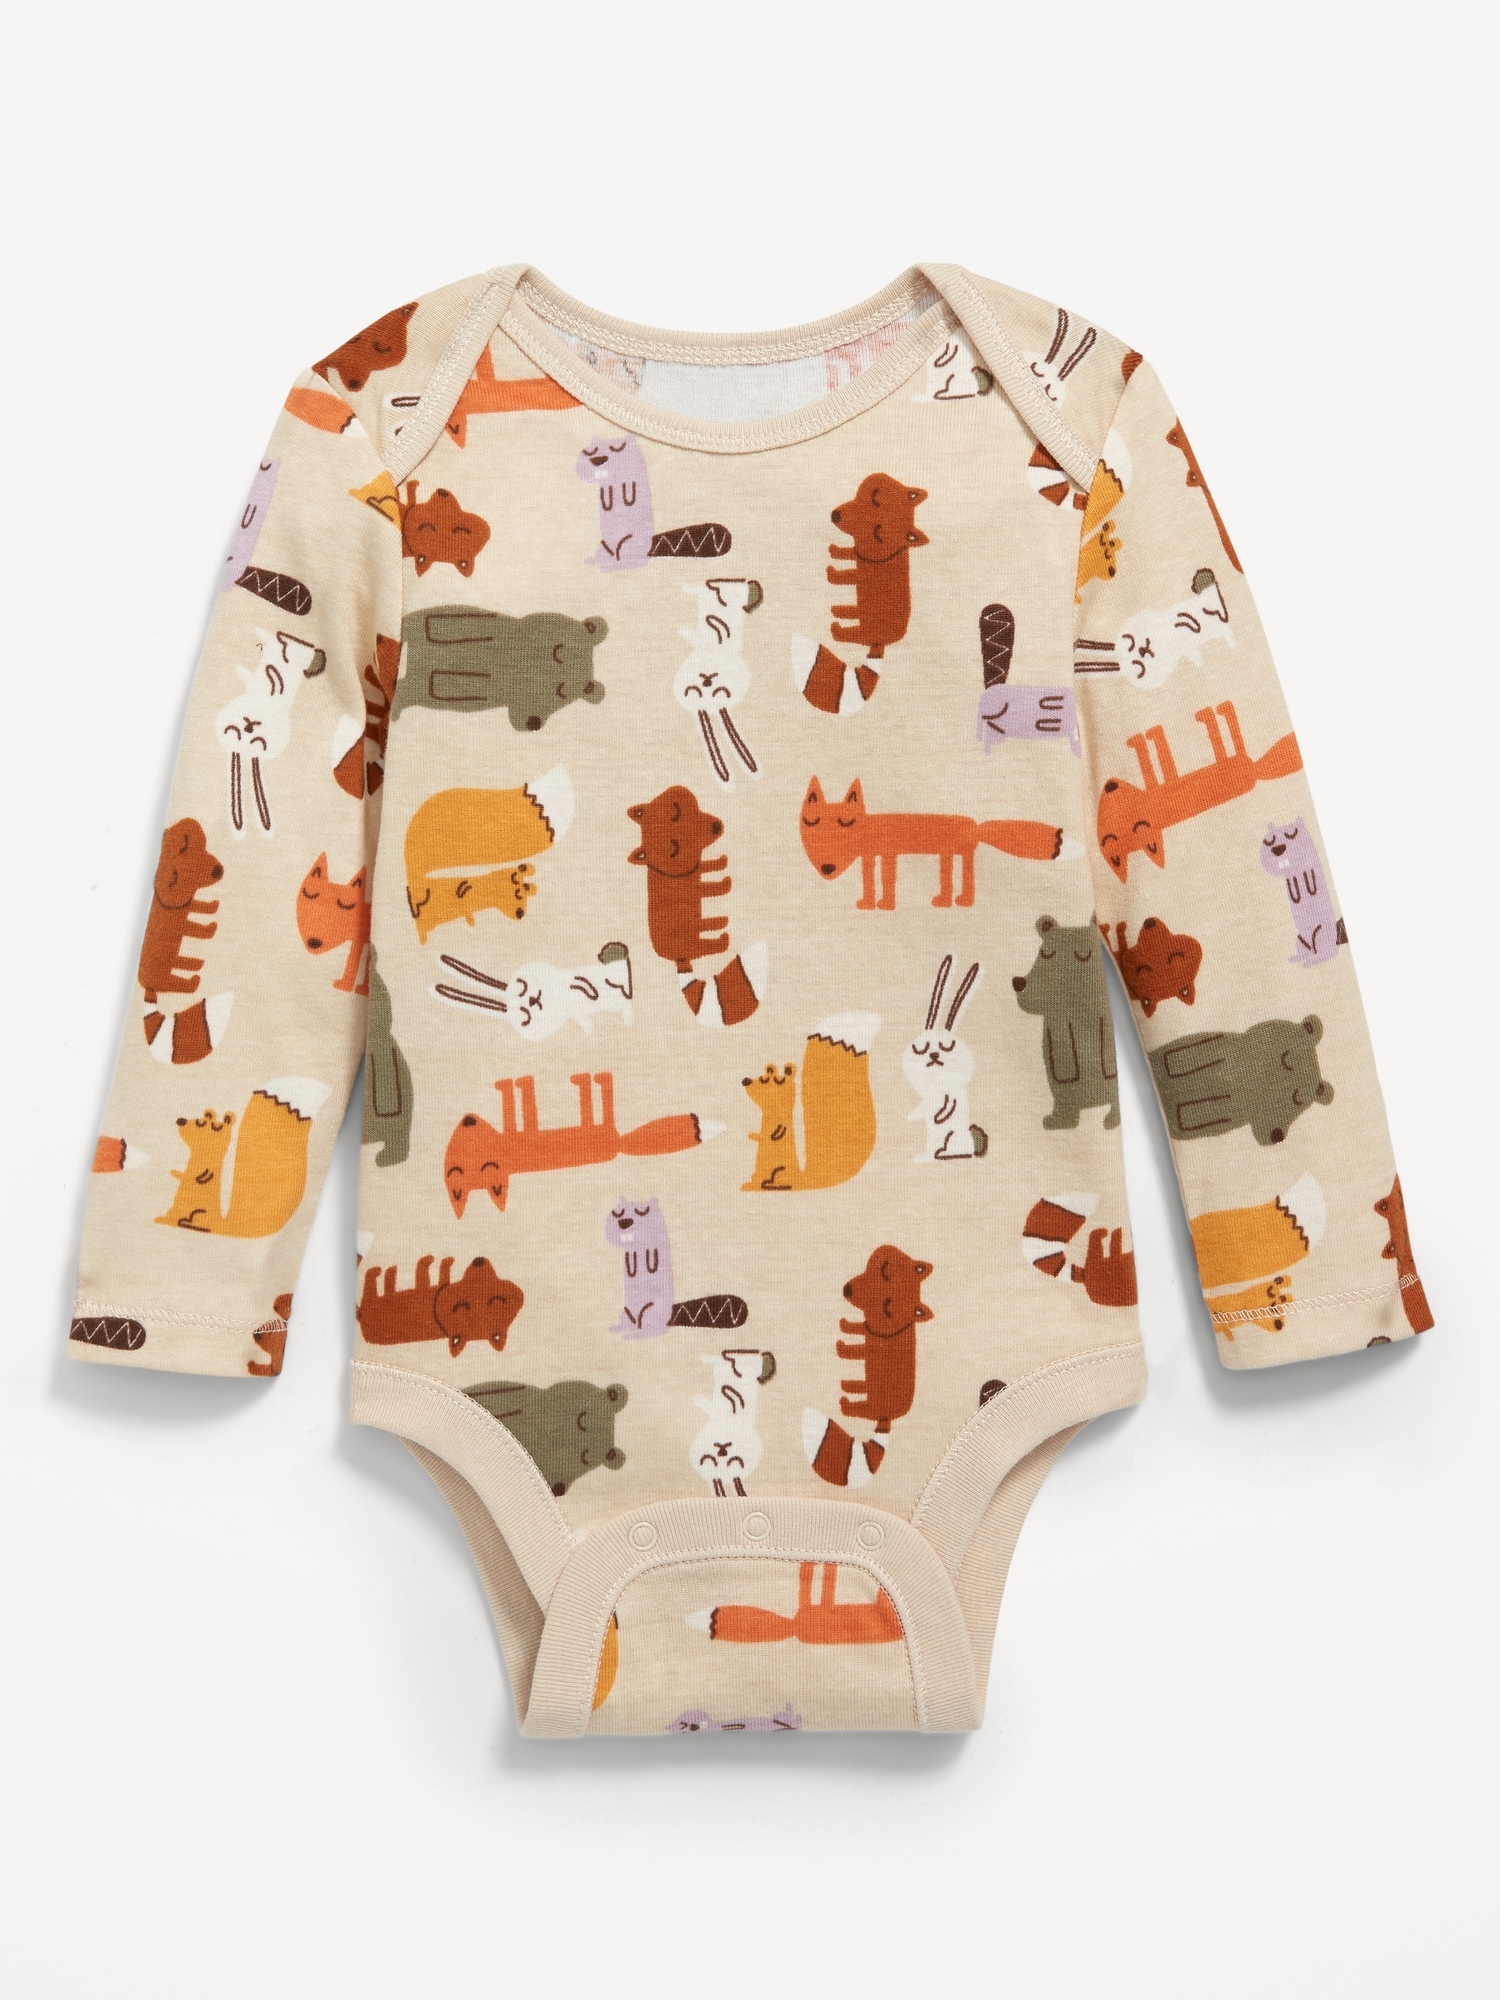 Unisex Long Sleeve Printed Bodysuit For Baby Old Navy